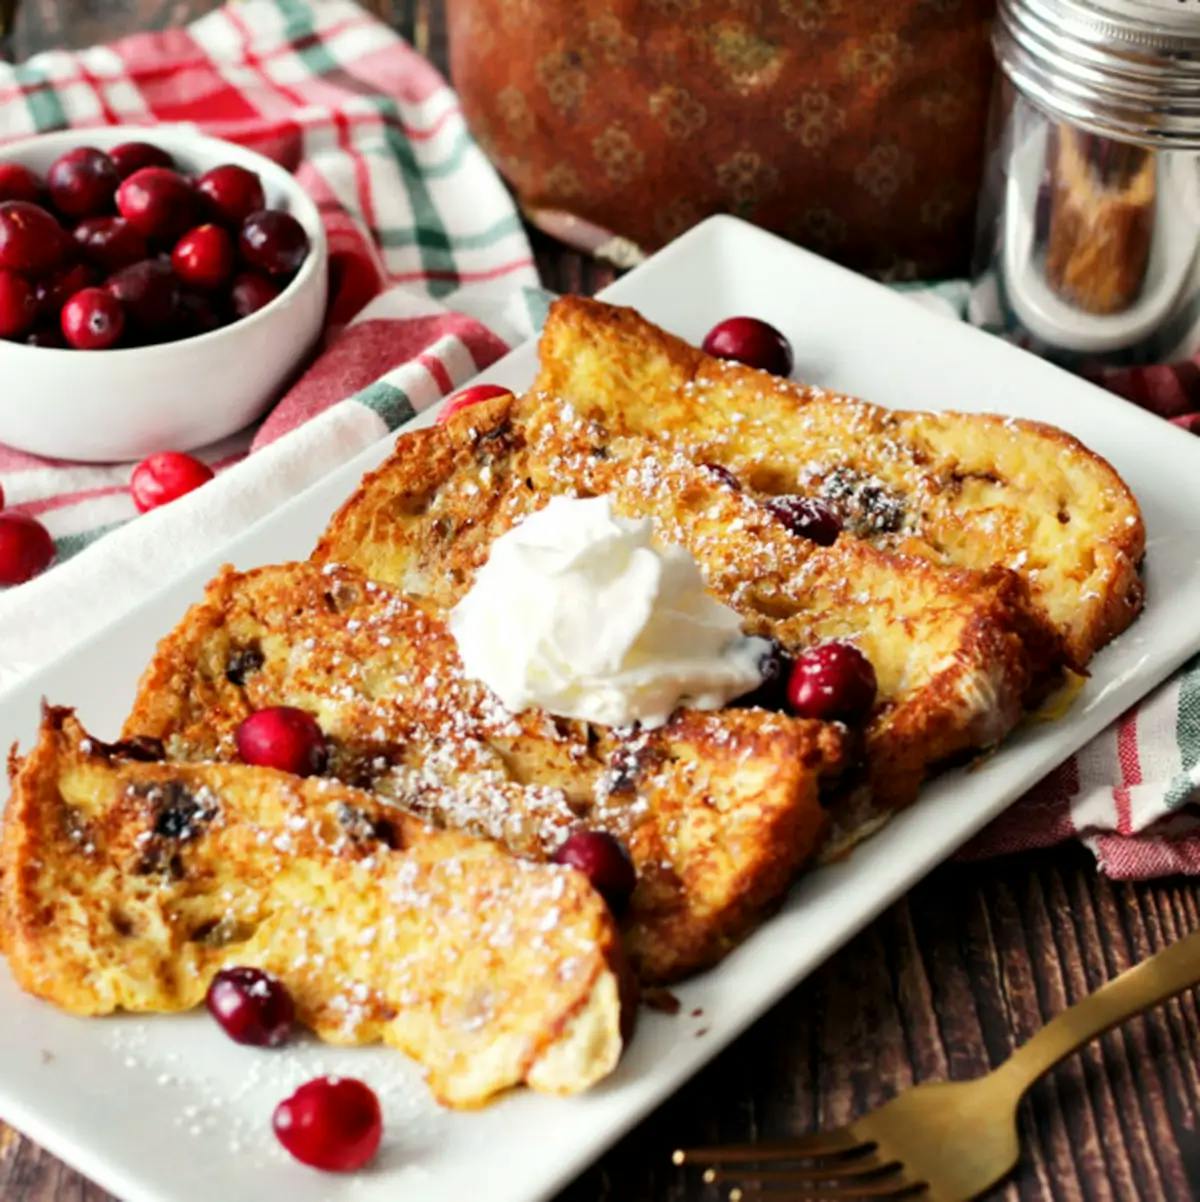 French toast made from panettone on a plate topped with cranberries and whipped cream.